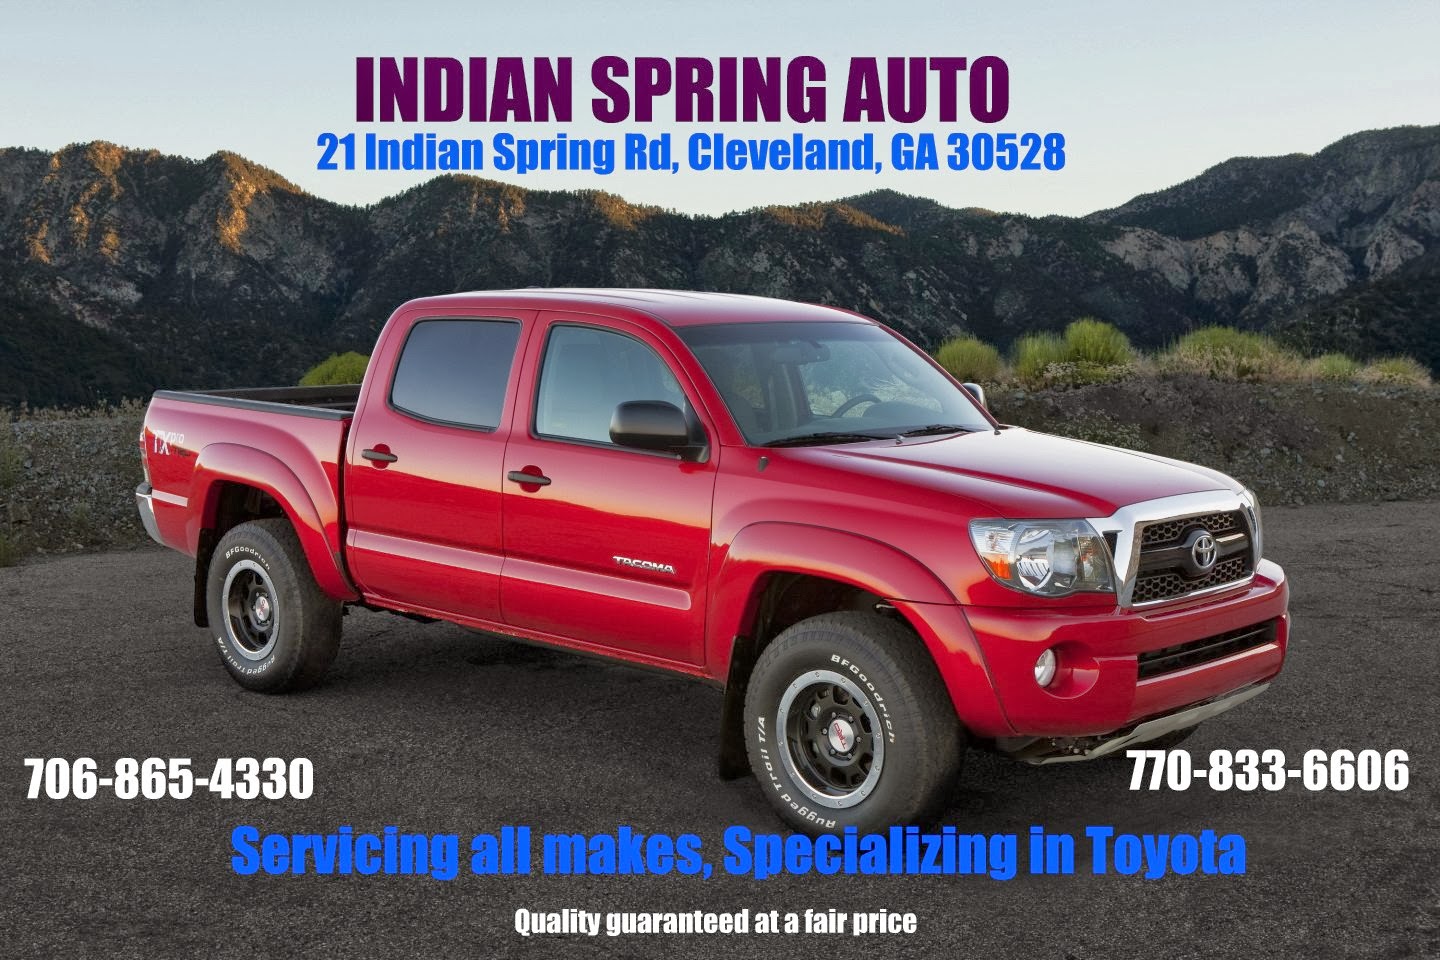 Indian Spring Auto